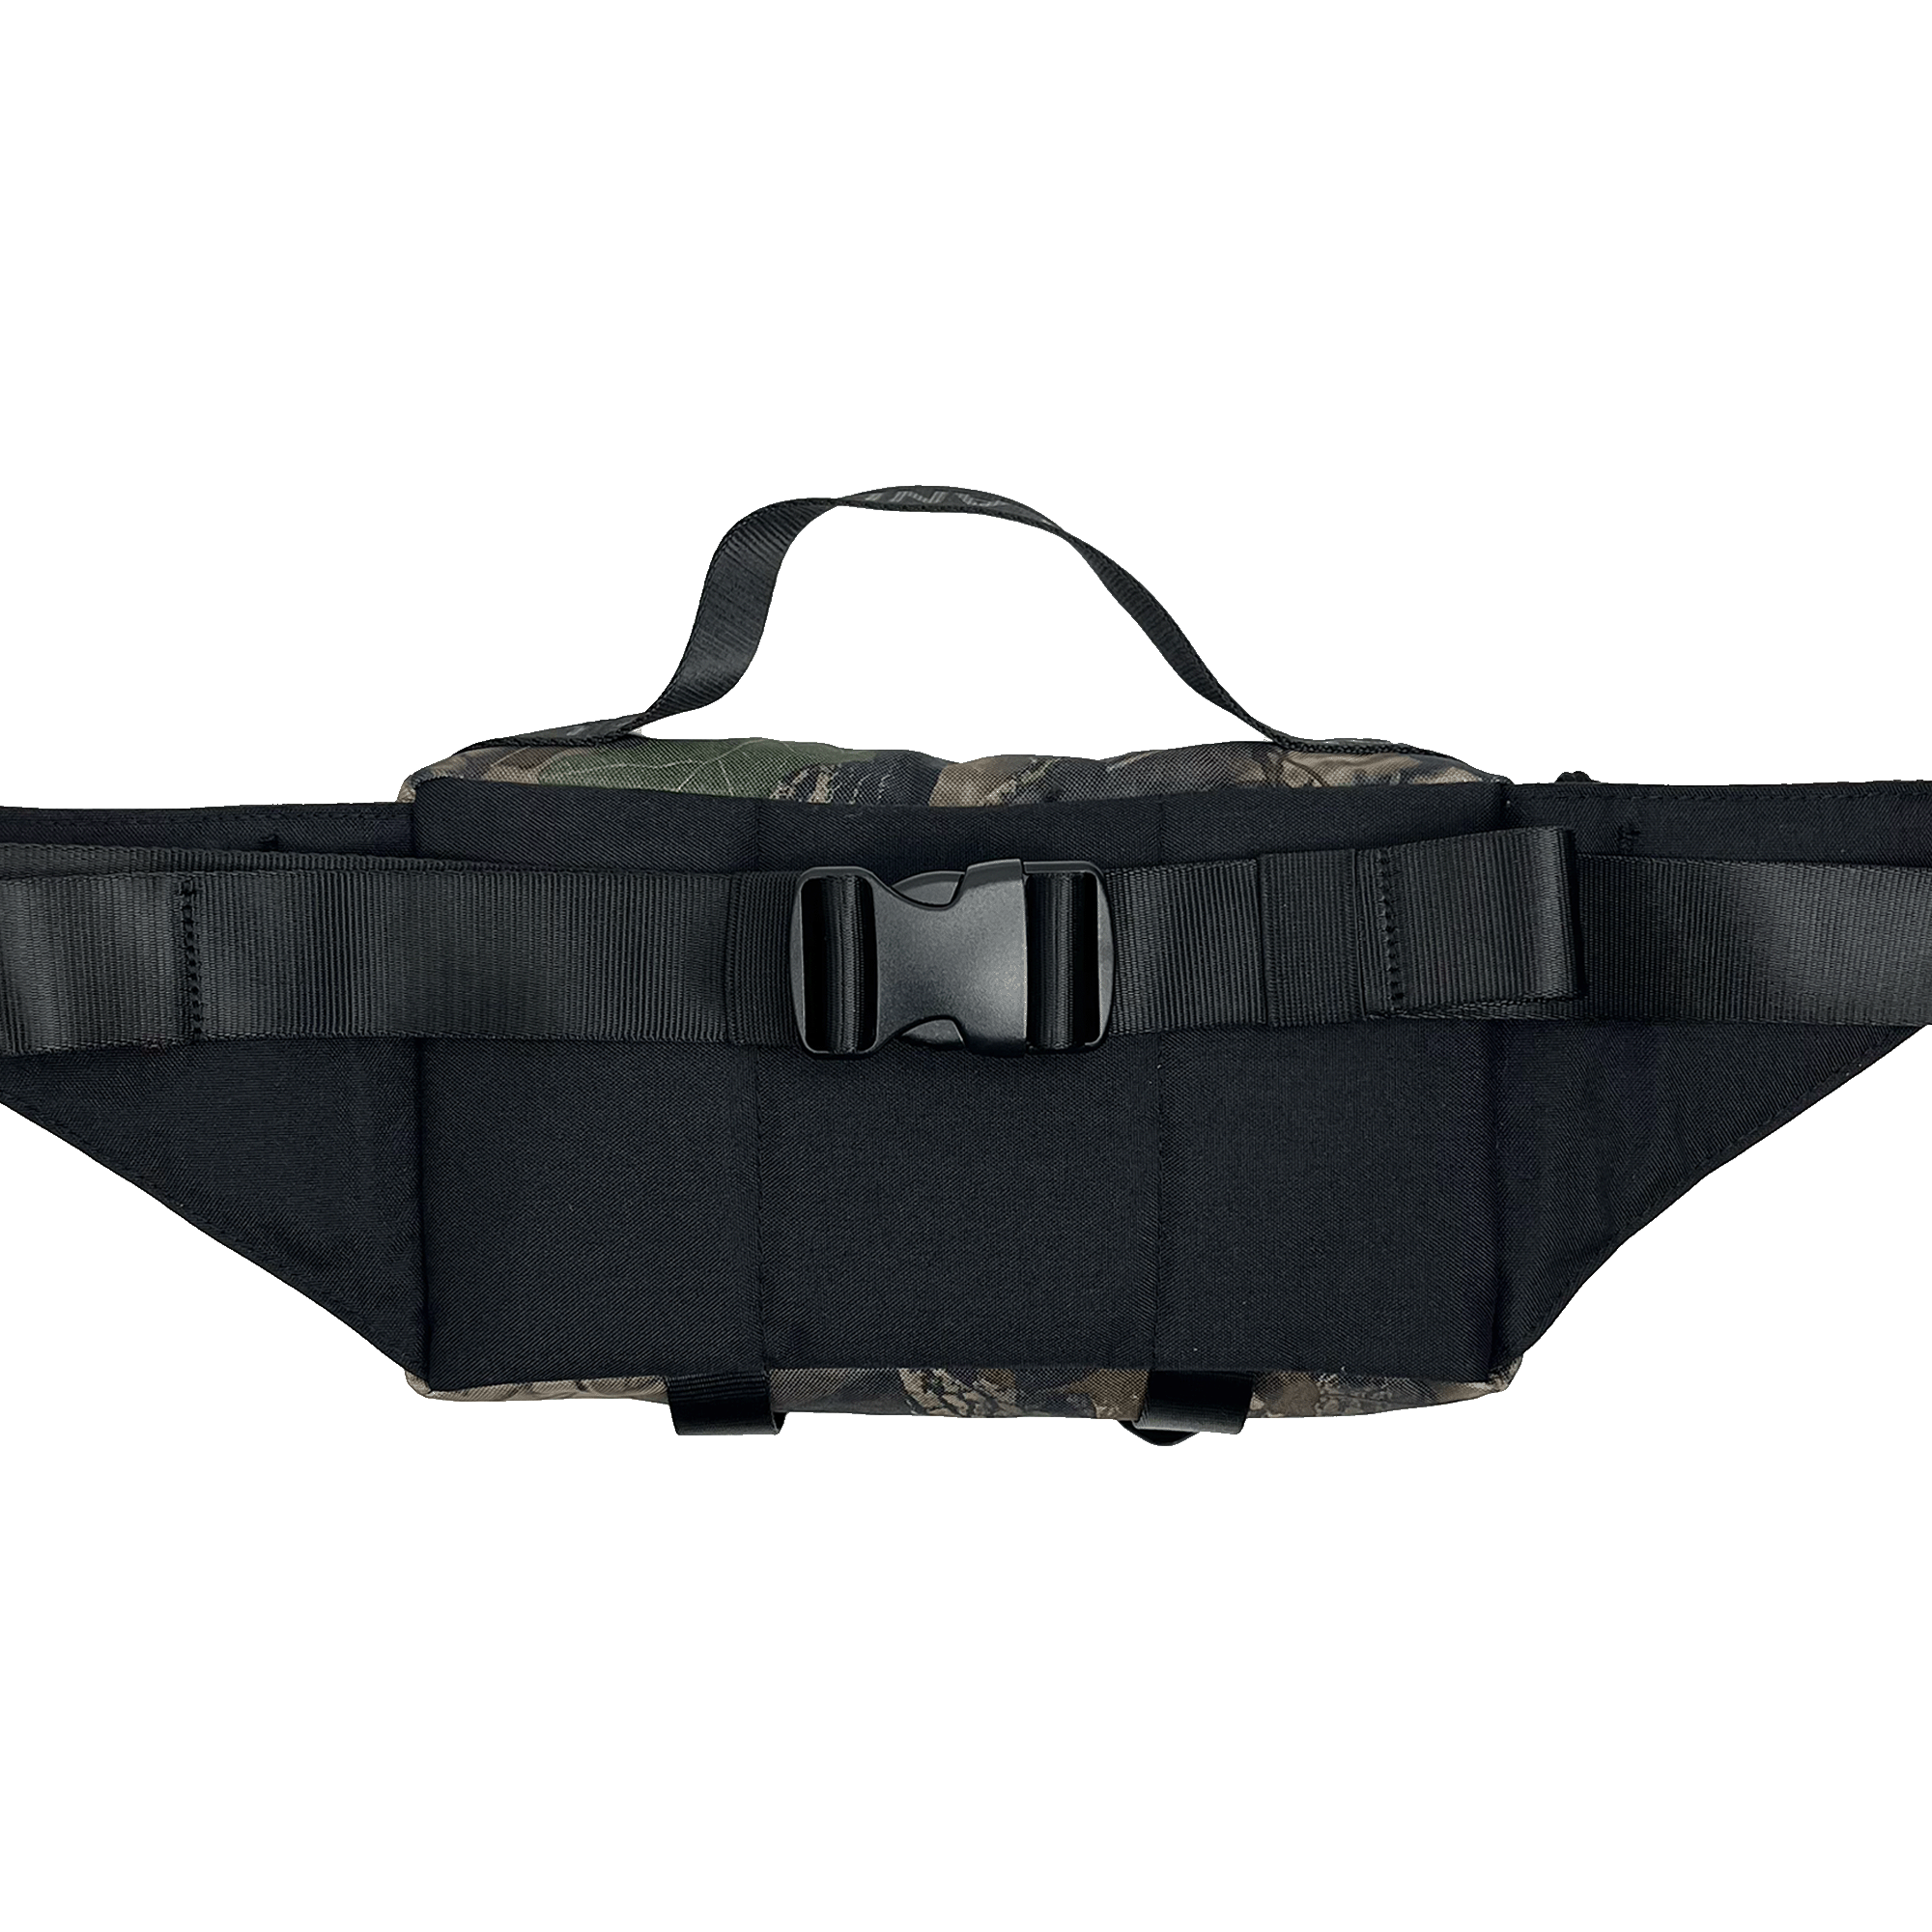 The backside of an Oakladish cross-body bag reveals black padding and a large hip belt with a durable clip.